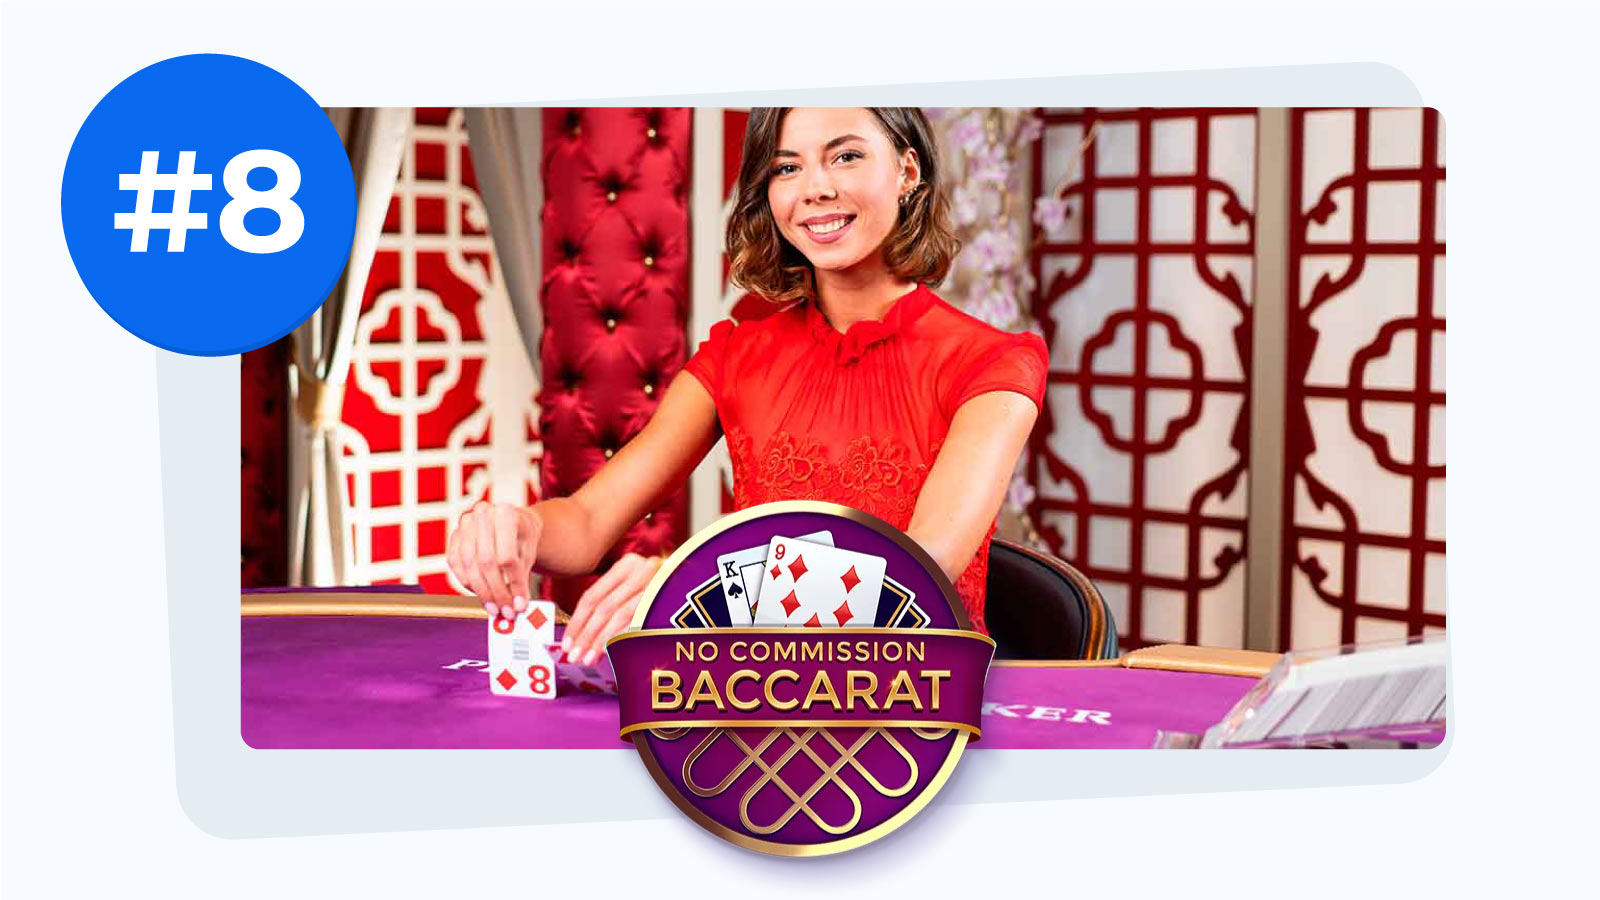 No Commission Baccarat on Mobile